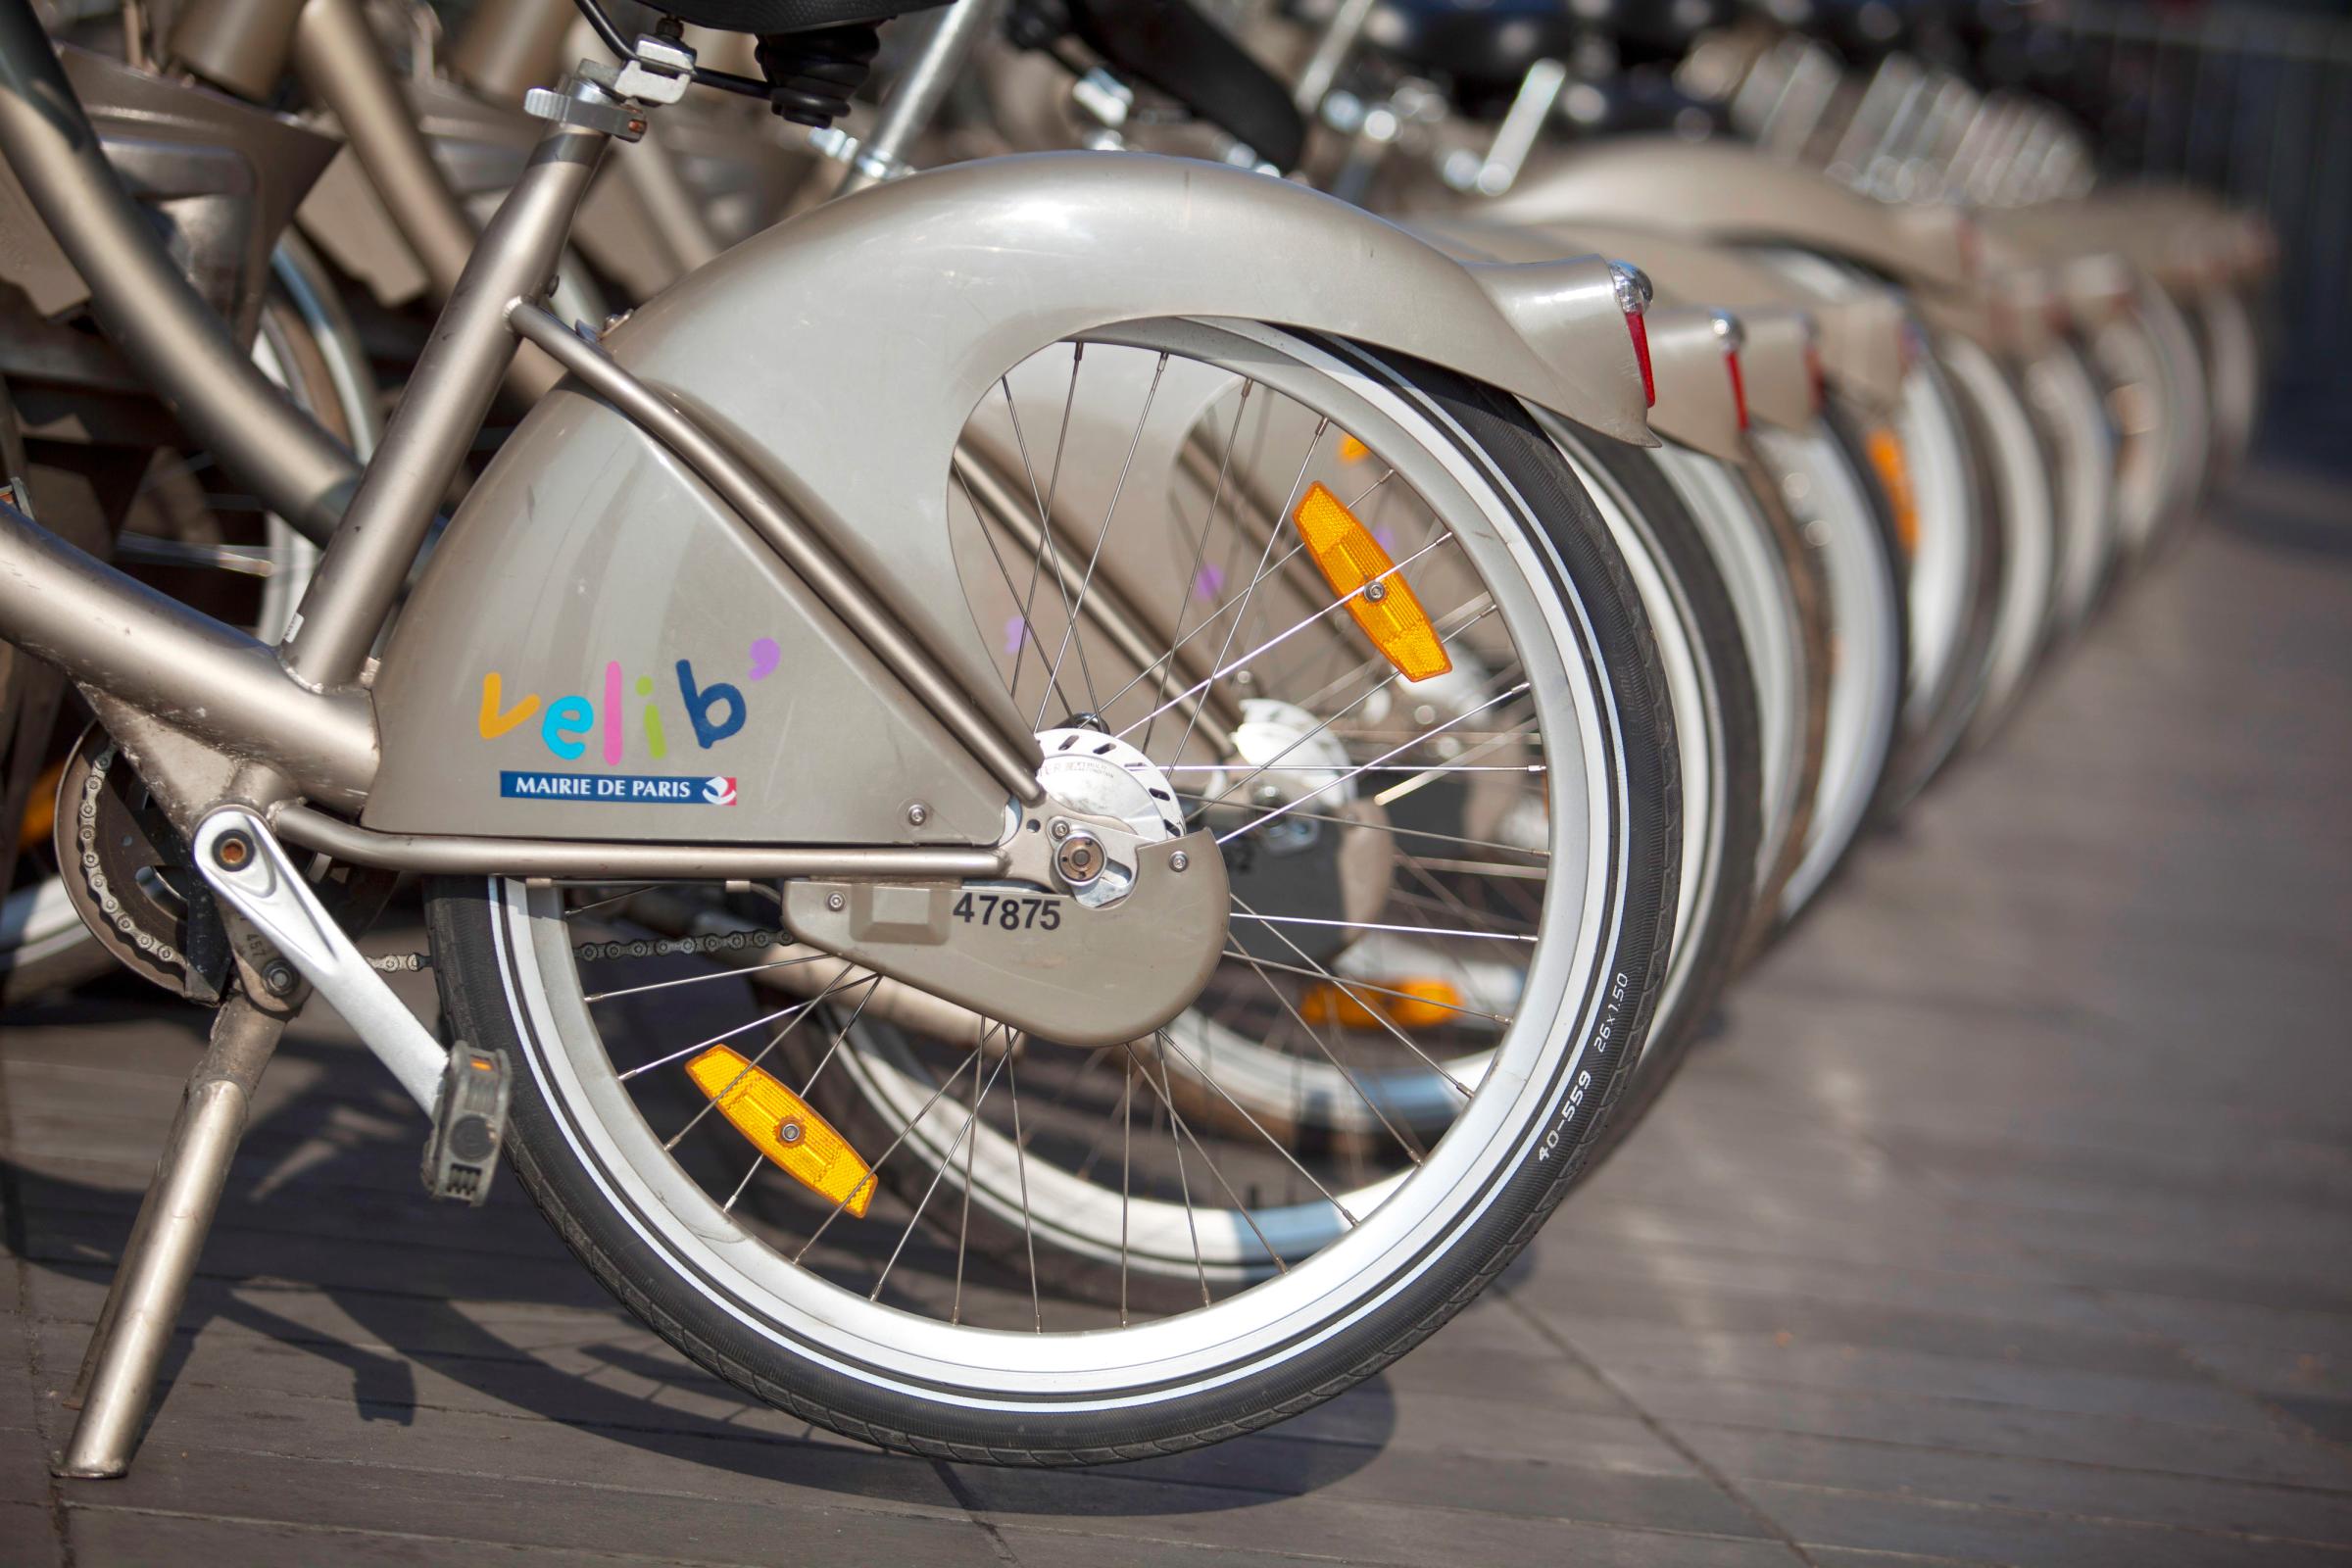 Bicycle And Electric Car-Sharing Schemes Ahead Of Paris Mayoral Election